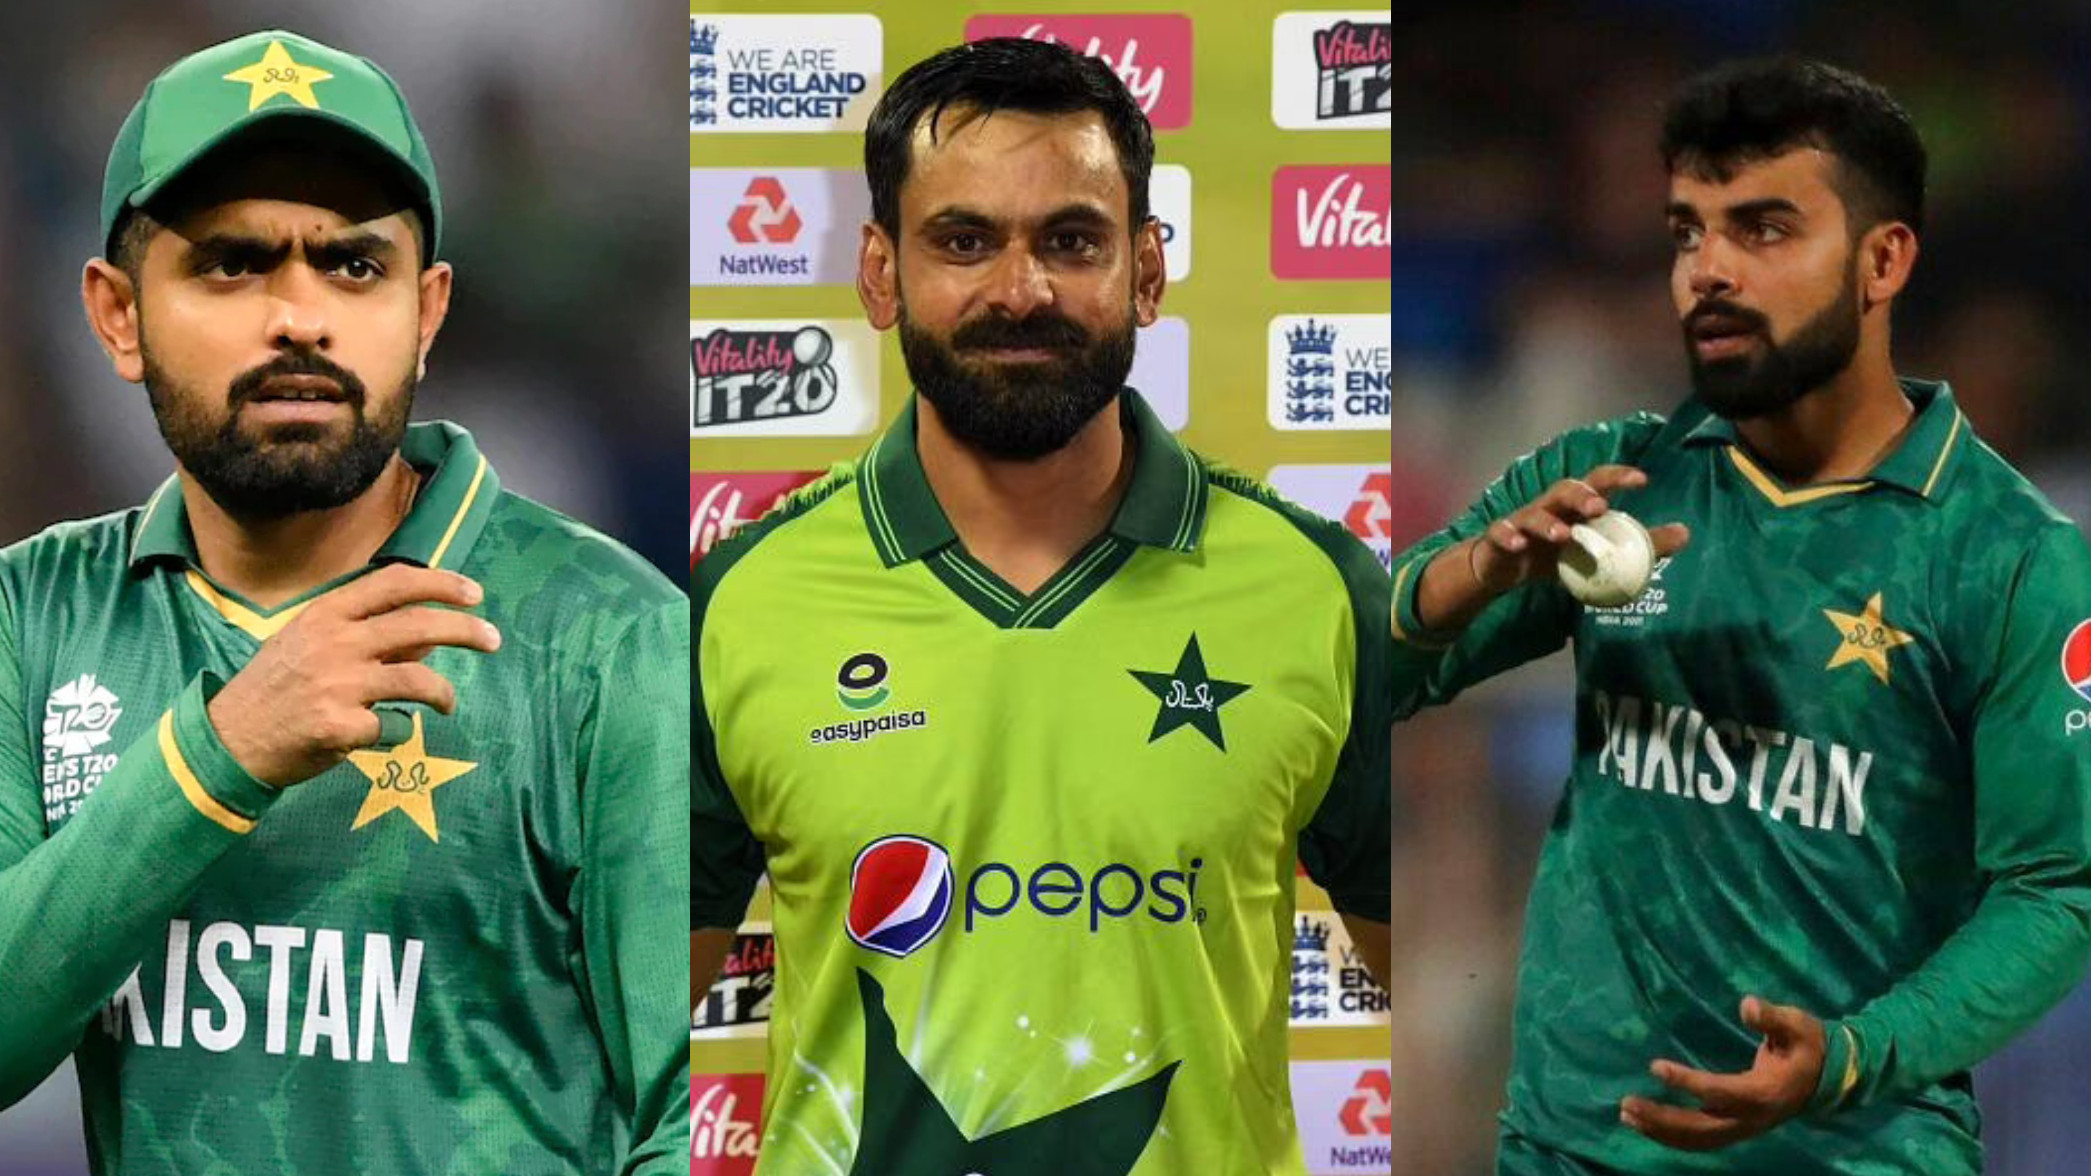 Mohammad Hafeez retires from international cricket; Pakistan cricket fraternity pays tribute